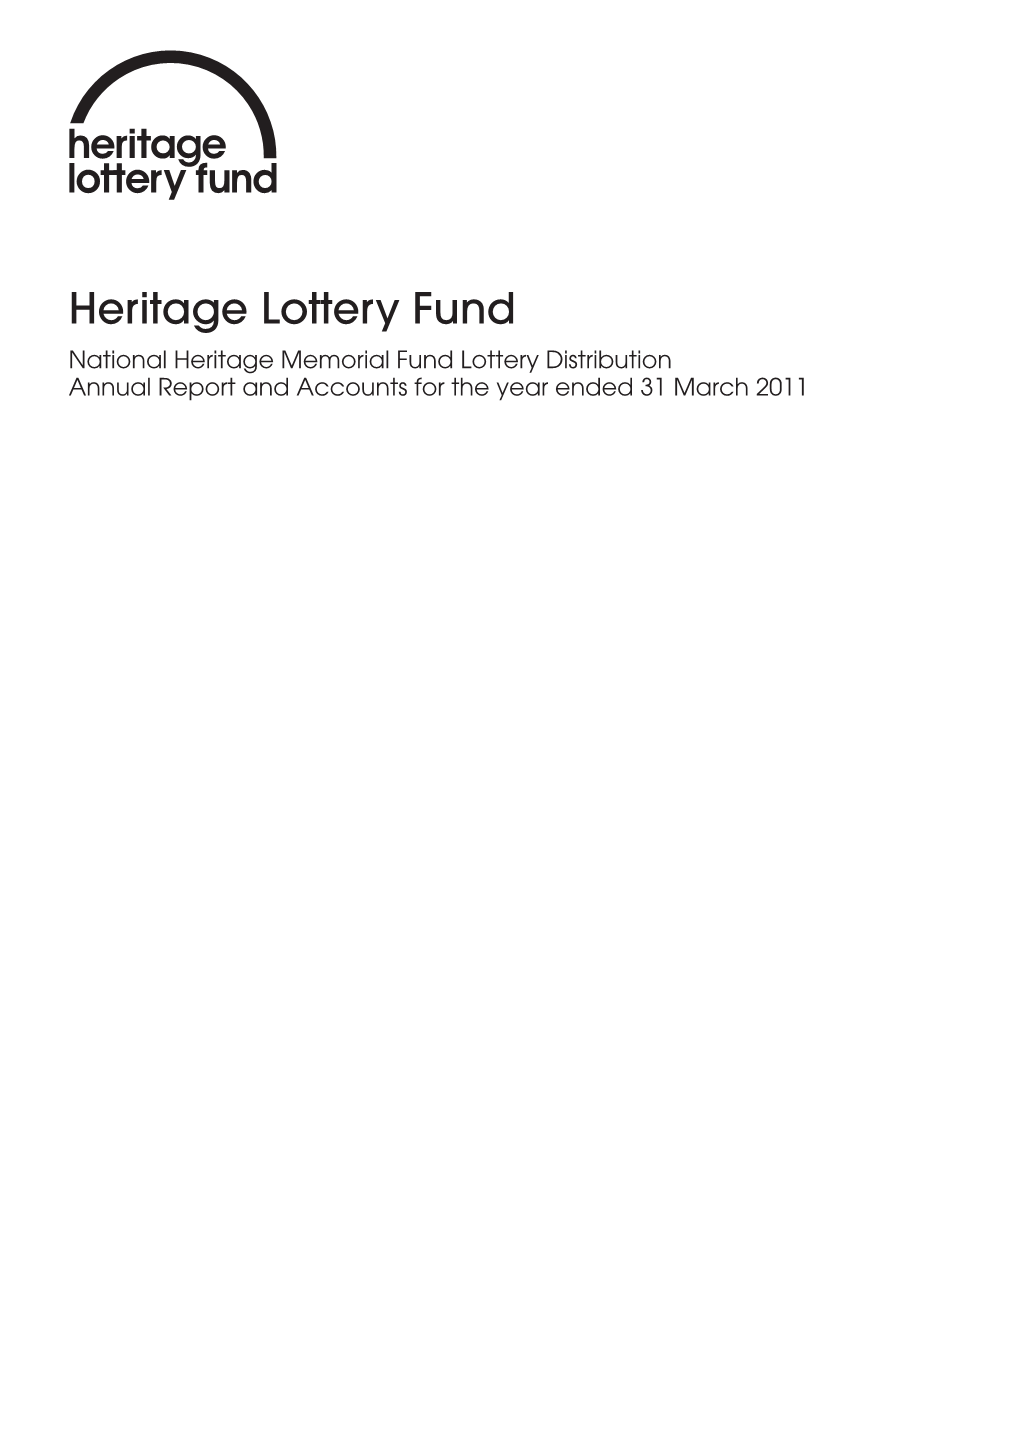 Heritage Lottery Fund National Heritage Memorial Fund Lottery Distribution Annual Report and Accounts for the Year Ended 31 March 2011